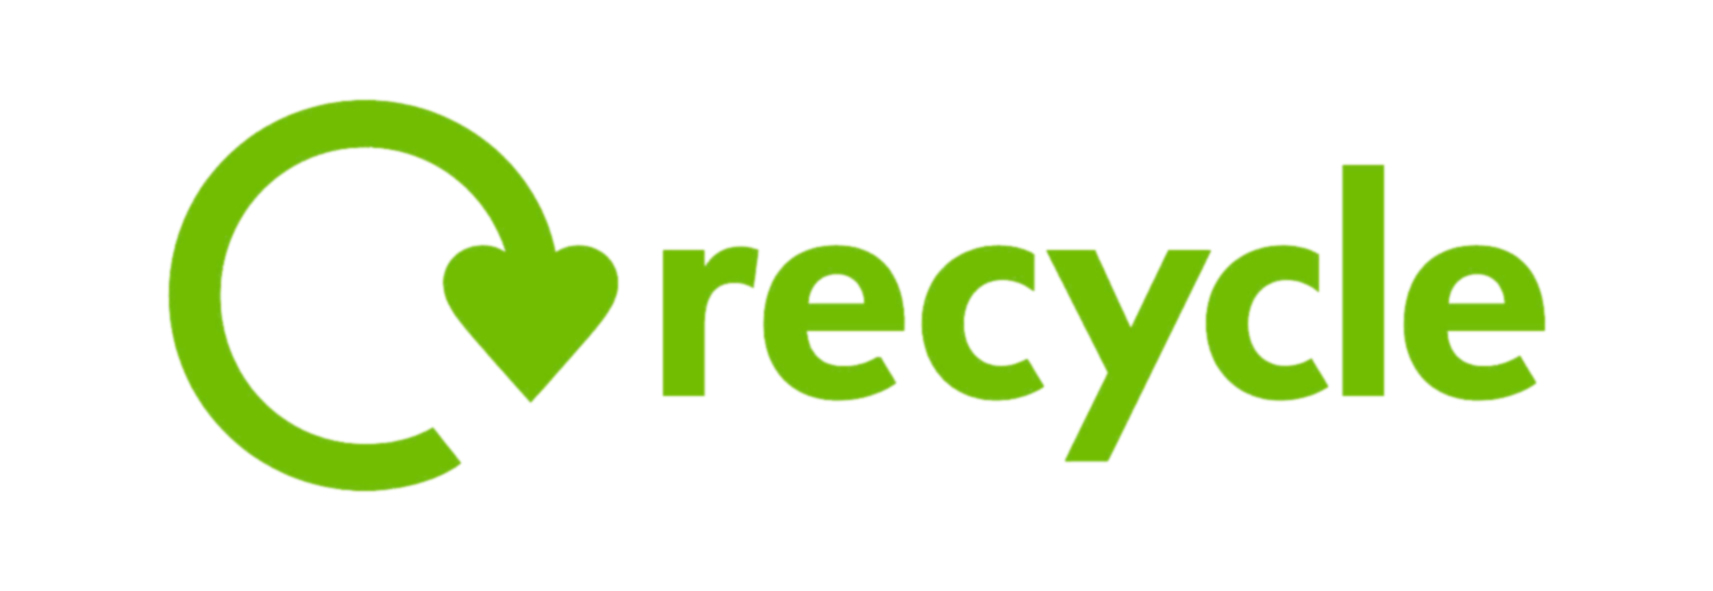 Free recycle download.